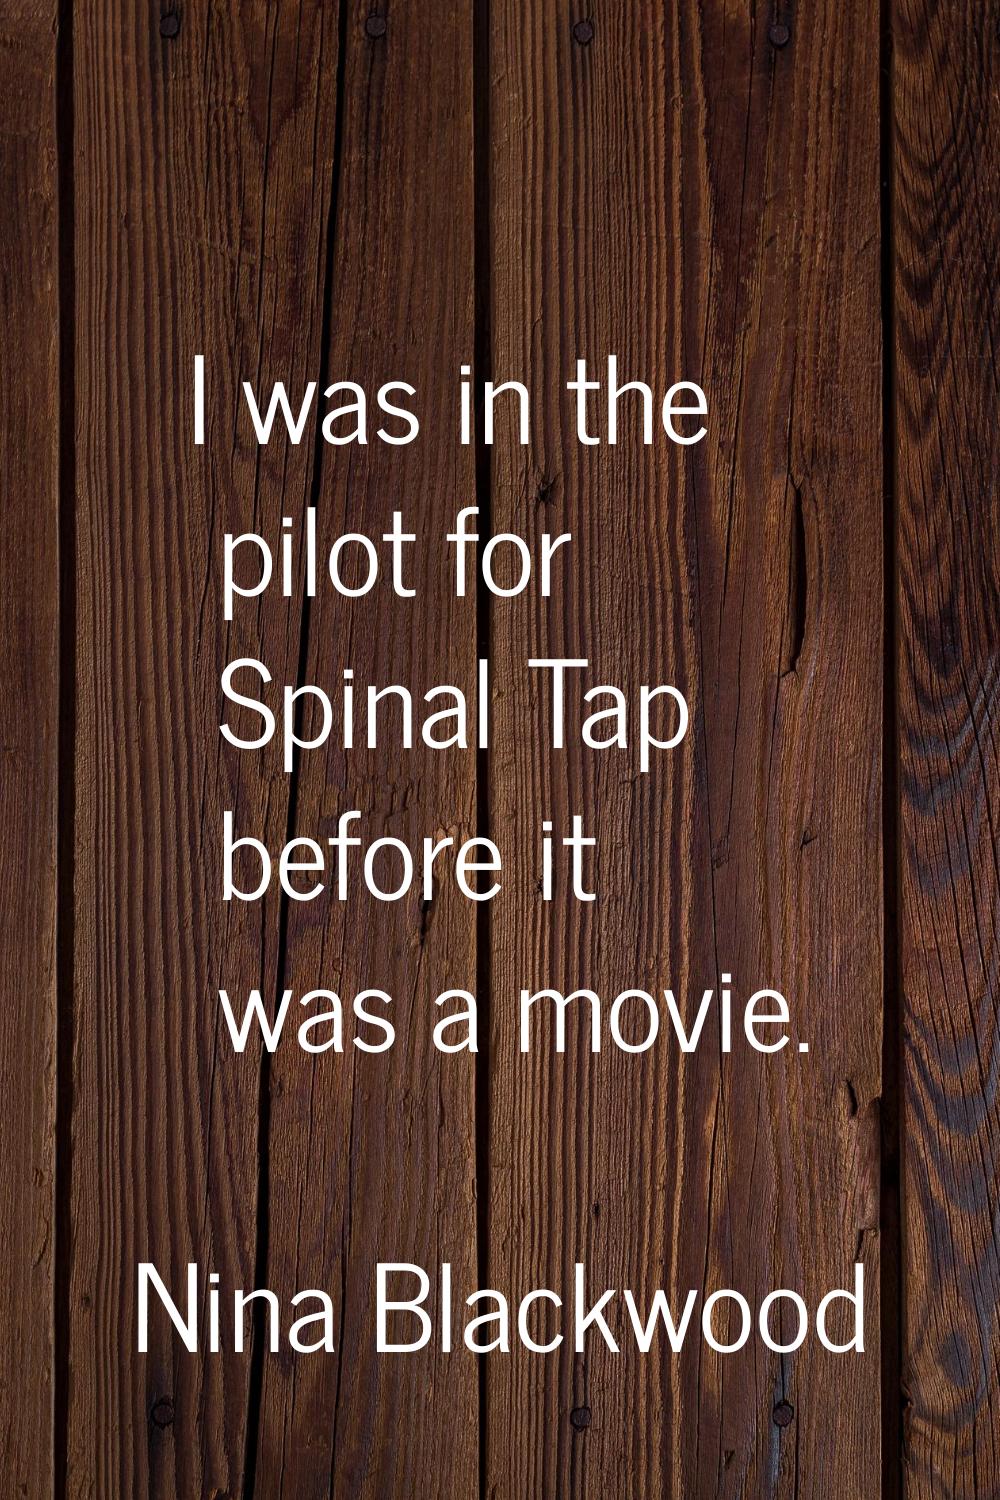 I was in the pilot for Spinal Tap before it was a movie.